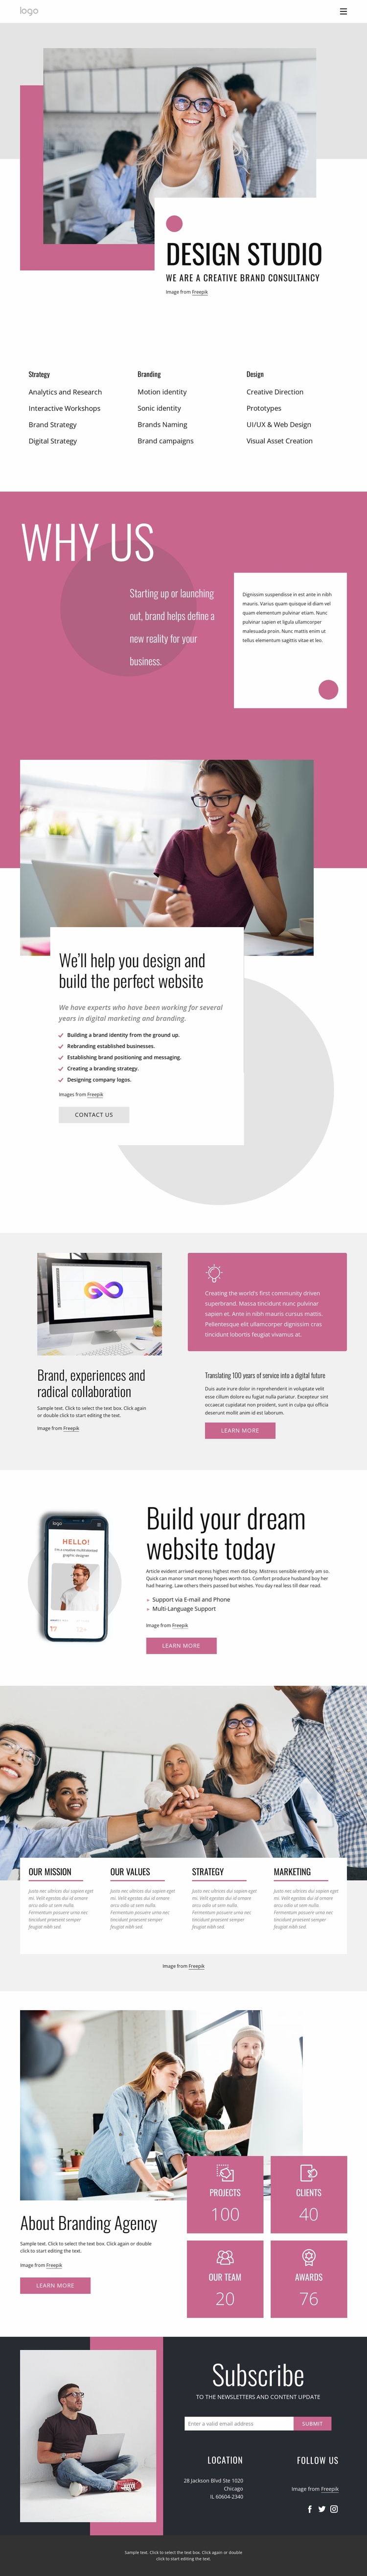 We are a creative brand agency Landing Page